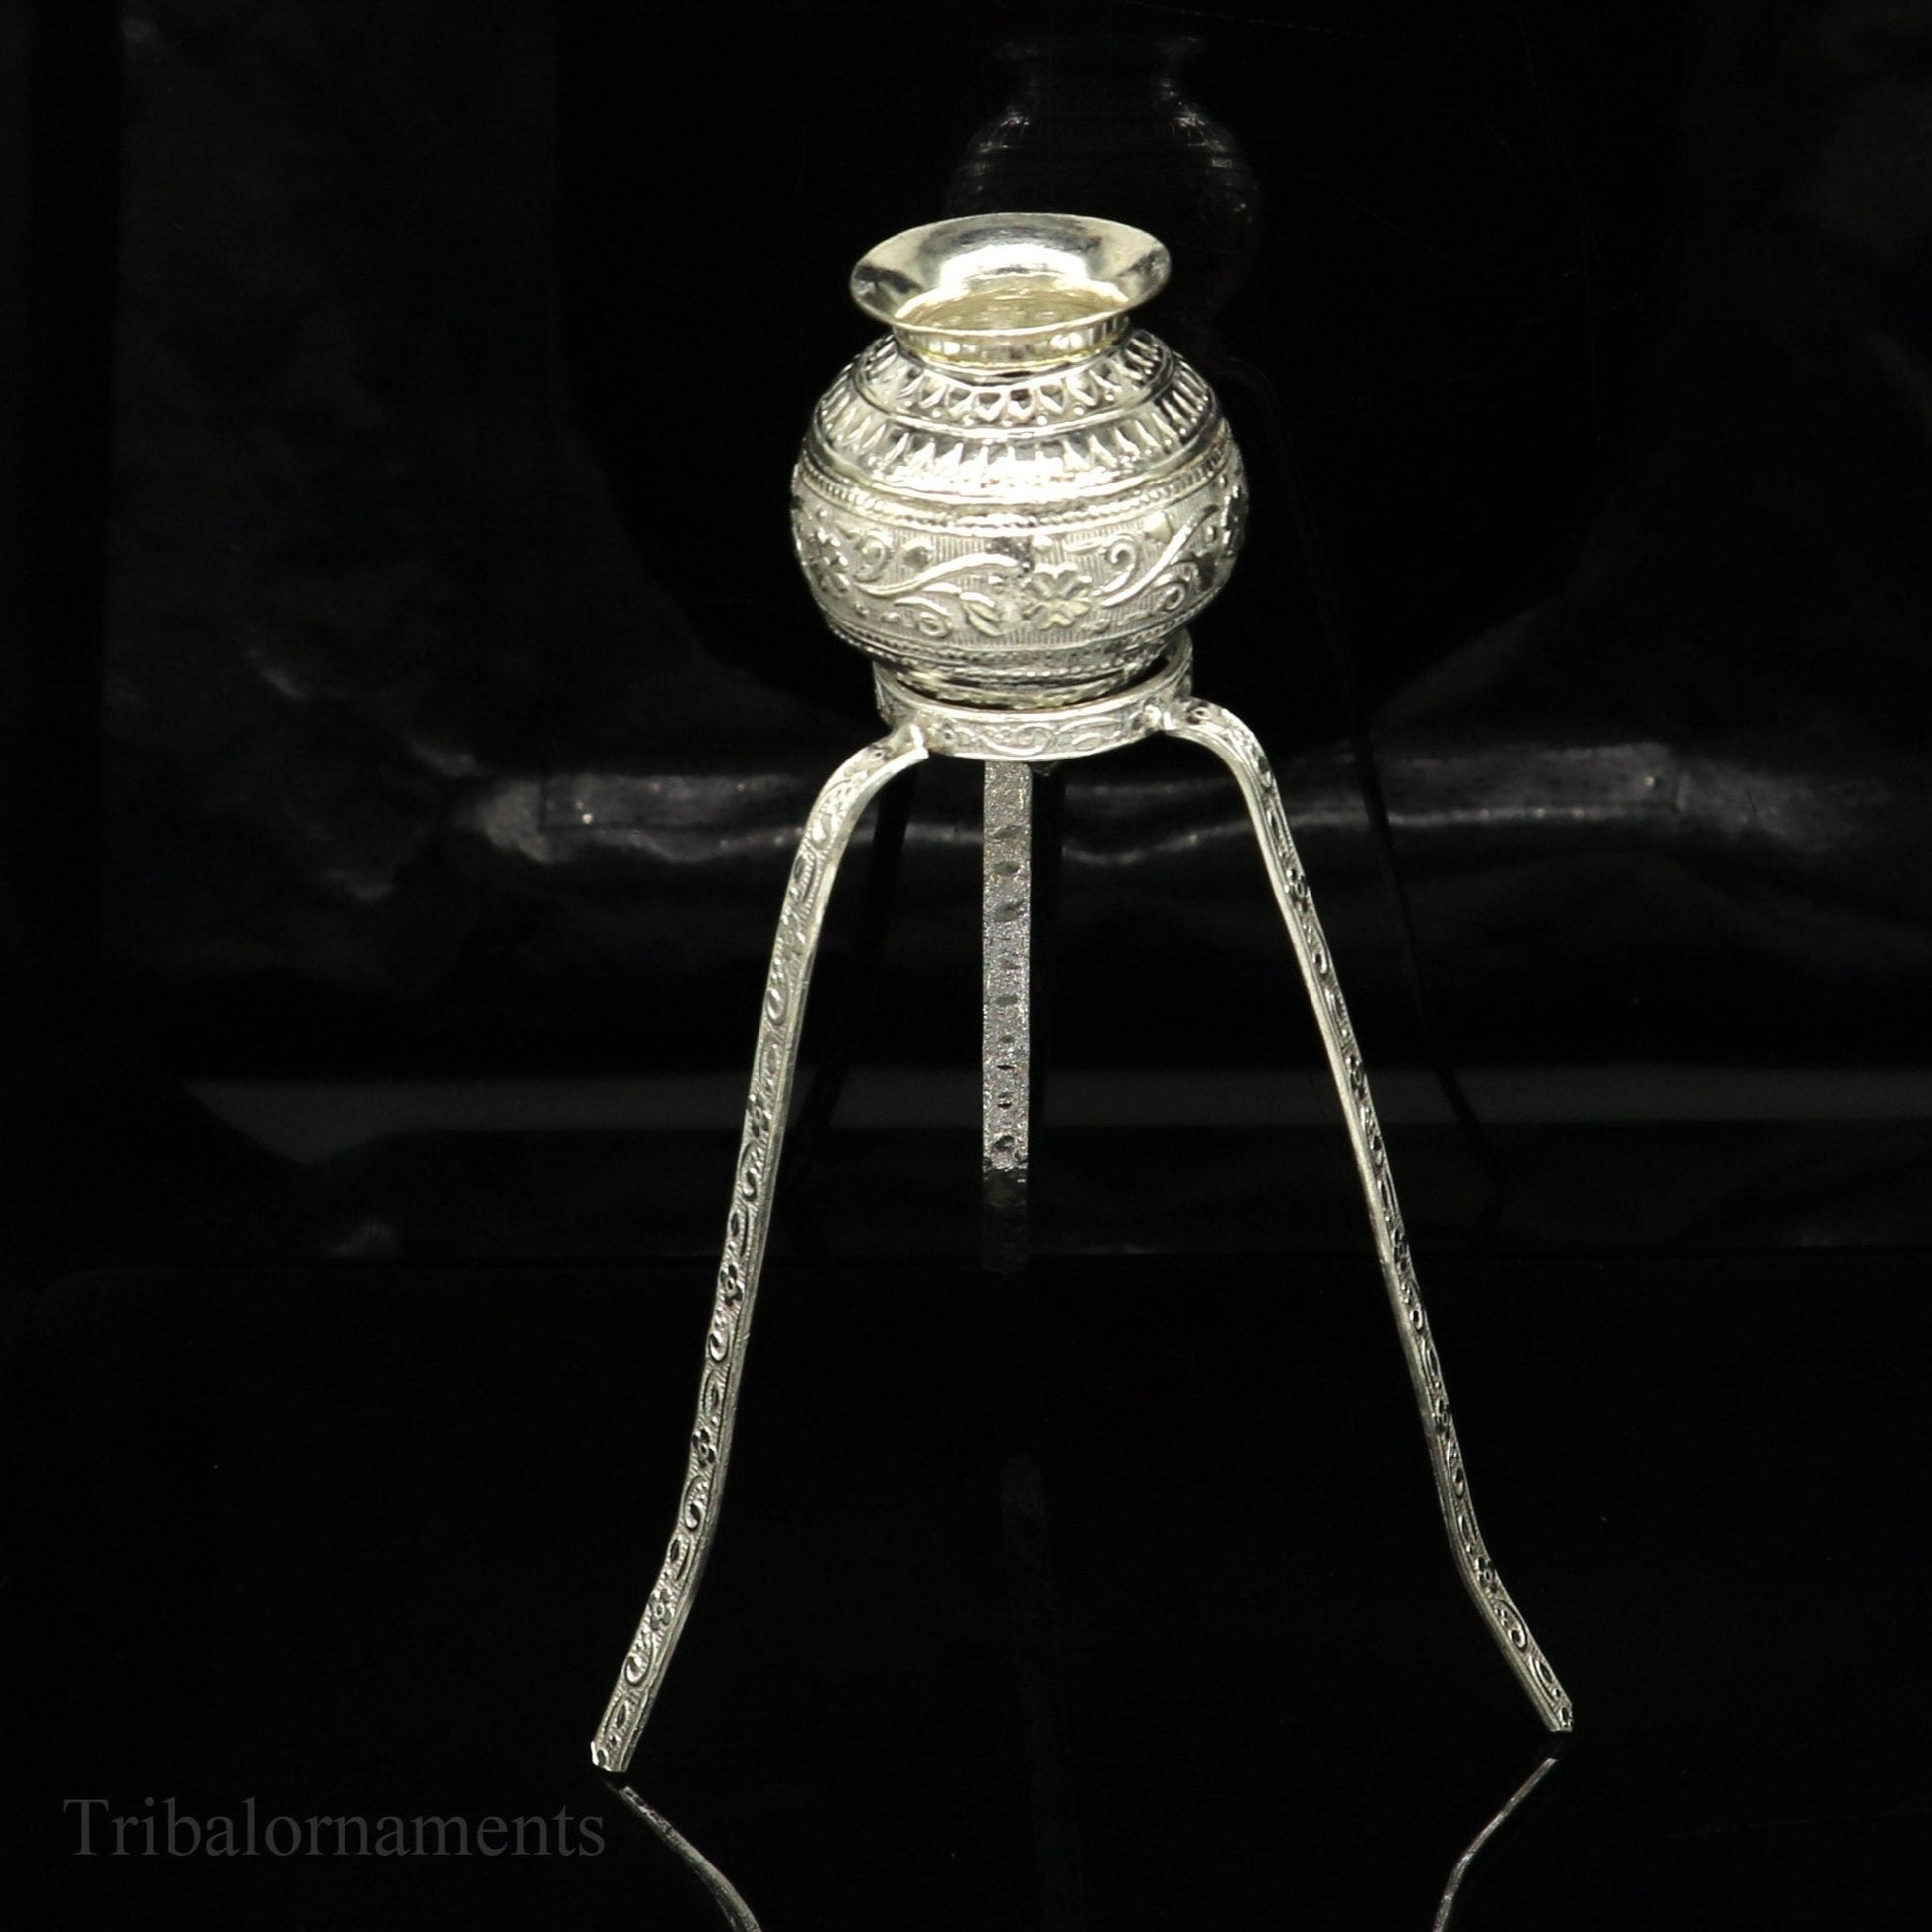 925 sterling silver handmade God shiva lingam water flow pot or puja kalas for Abhishek of lingam, best worshipping article from india su492 - TRIBAL ORNAMENTS